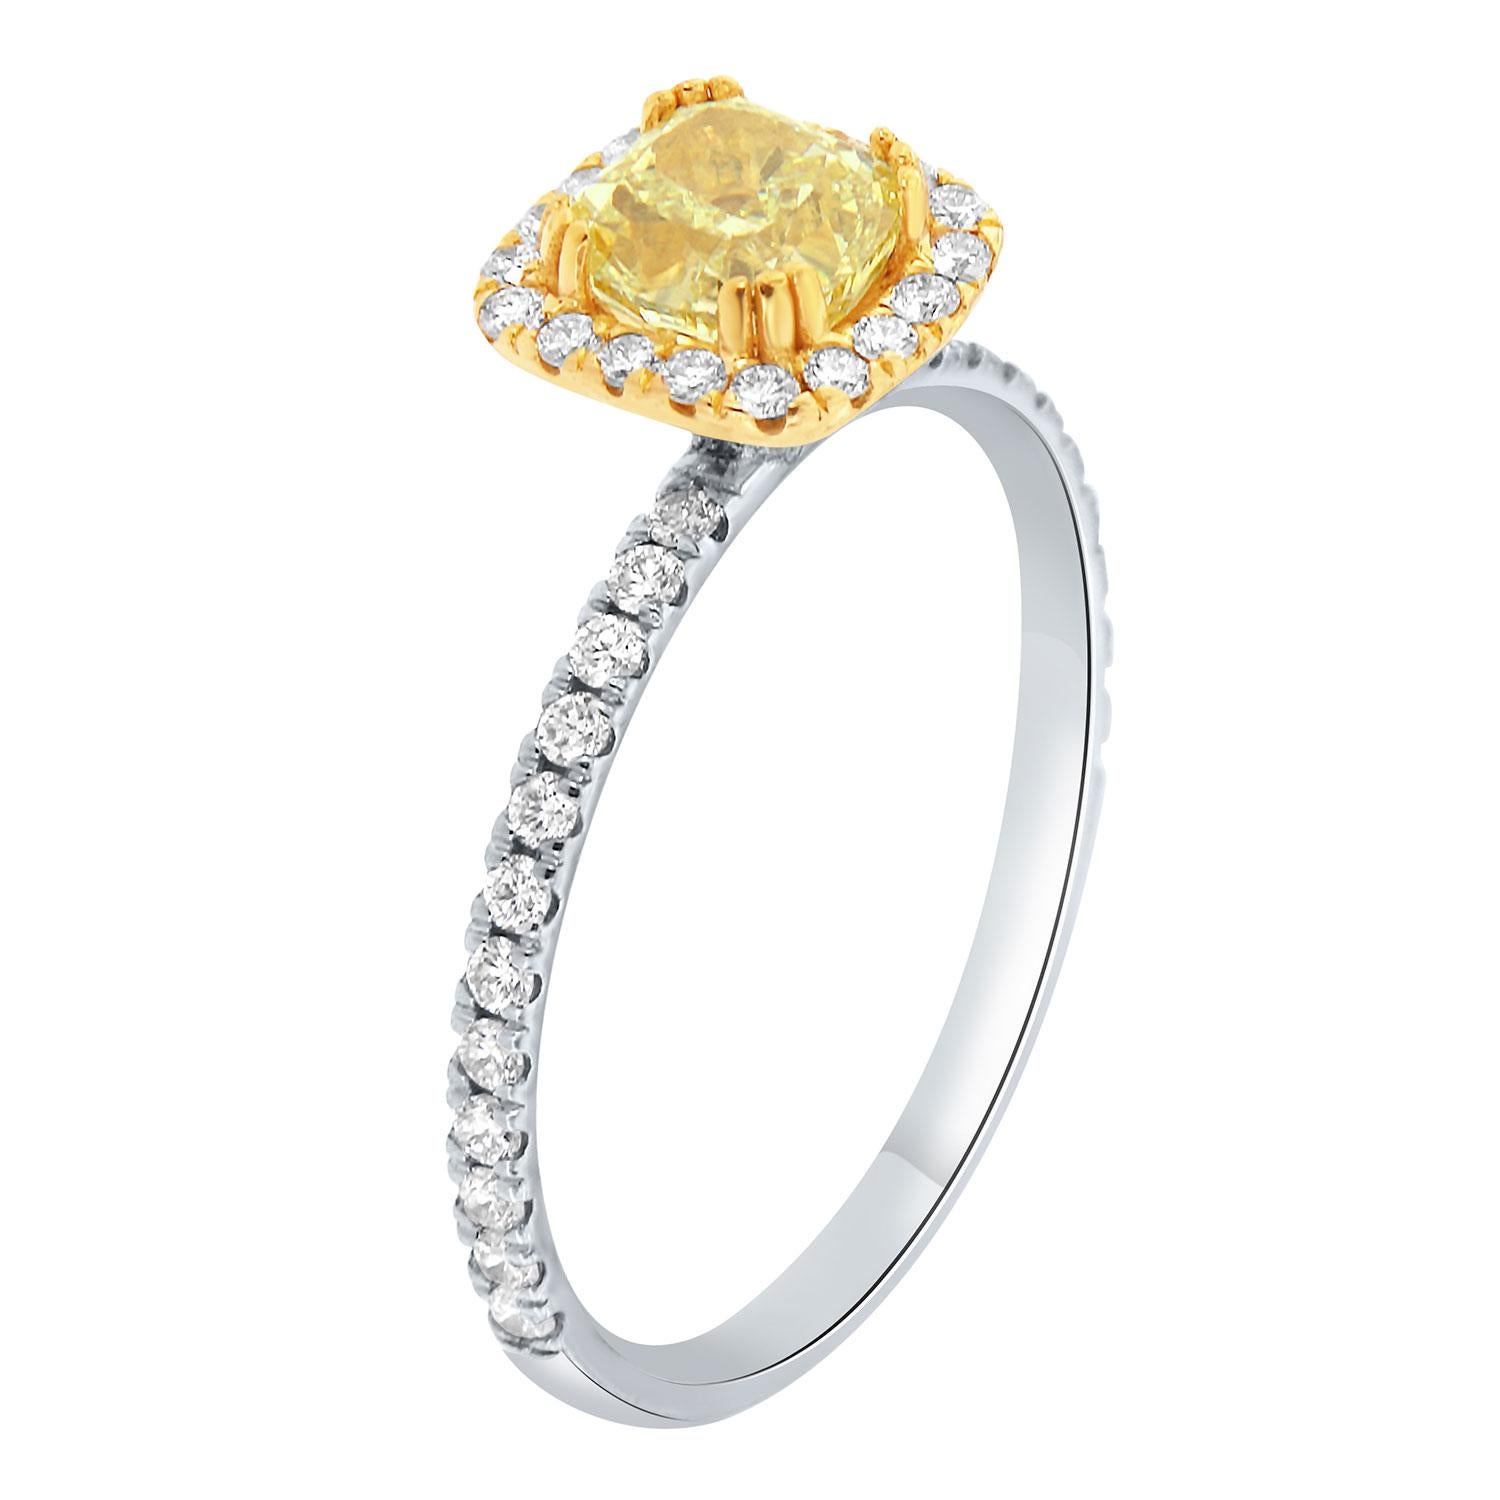 This Delicate ring is spectacular! It features a 0.83-carat cushion-shaped Yellow diamond-set in twelve (12) minimalist prongs and encircled by brilliant round diamonds Micro-Prong set to maximize brilliance. The Cushion-Shap Halo crown towered on